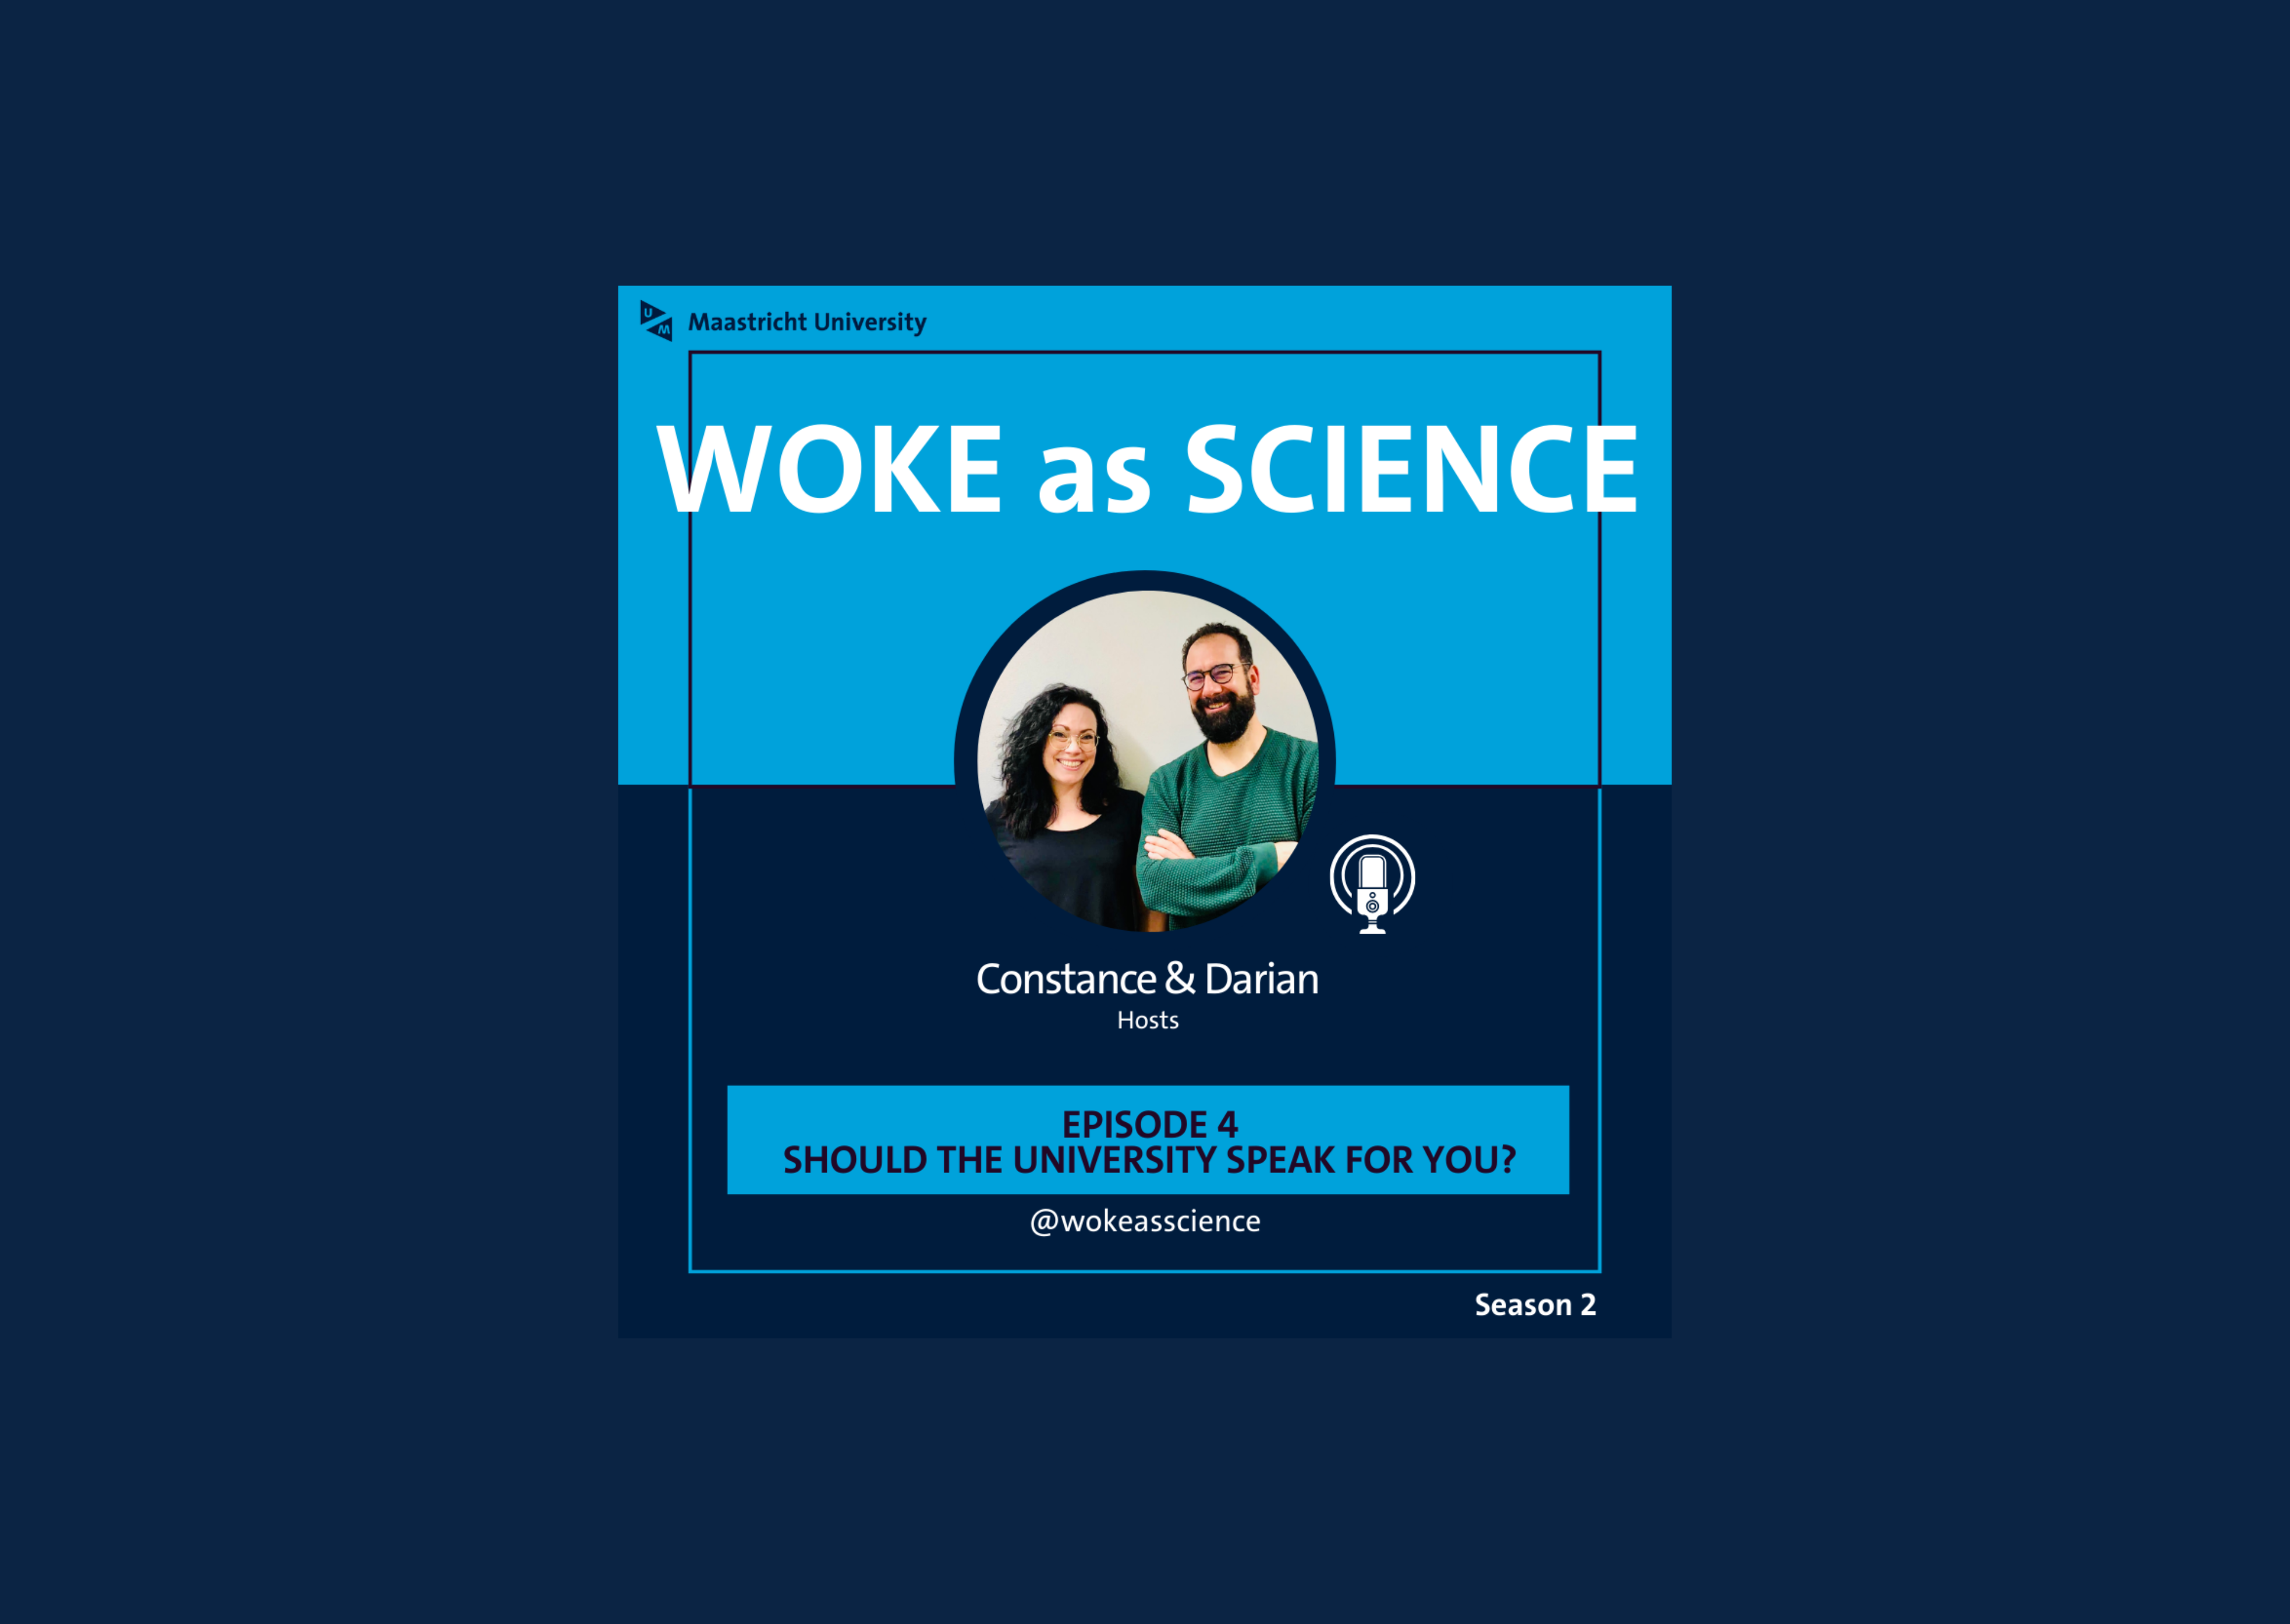 Graphic for the podcast "Woke as Science," hosted by Constance and Darian, featuring the Maastricht University logo. The title reads "WOKE as SCIENCE" in bold letters, and below, it indicates "EPISODE 4: SHOULD THE UNIVERSITY SPEAK FOR YOU?" The podcast handle @wokeasscience is also displayed, with the note "Season 2" in the bottom right corner.